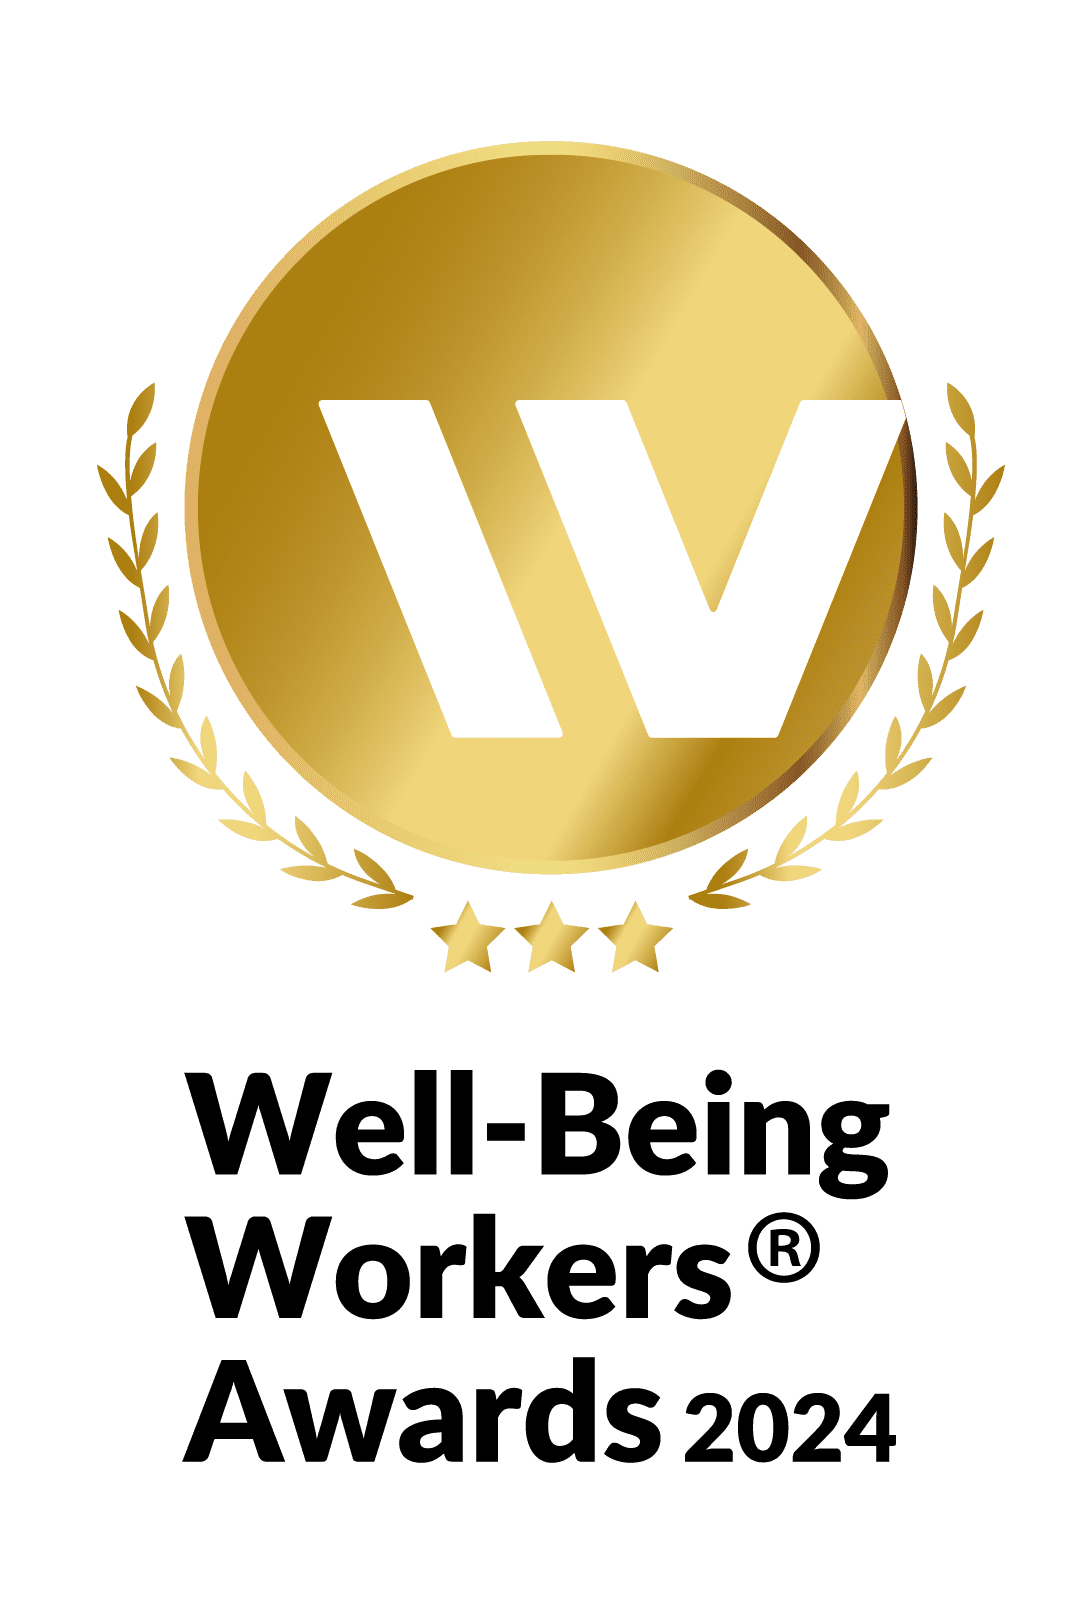 Well-Being Workers Awards 2024